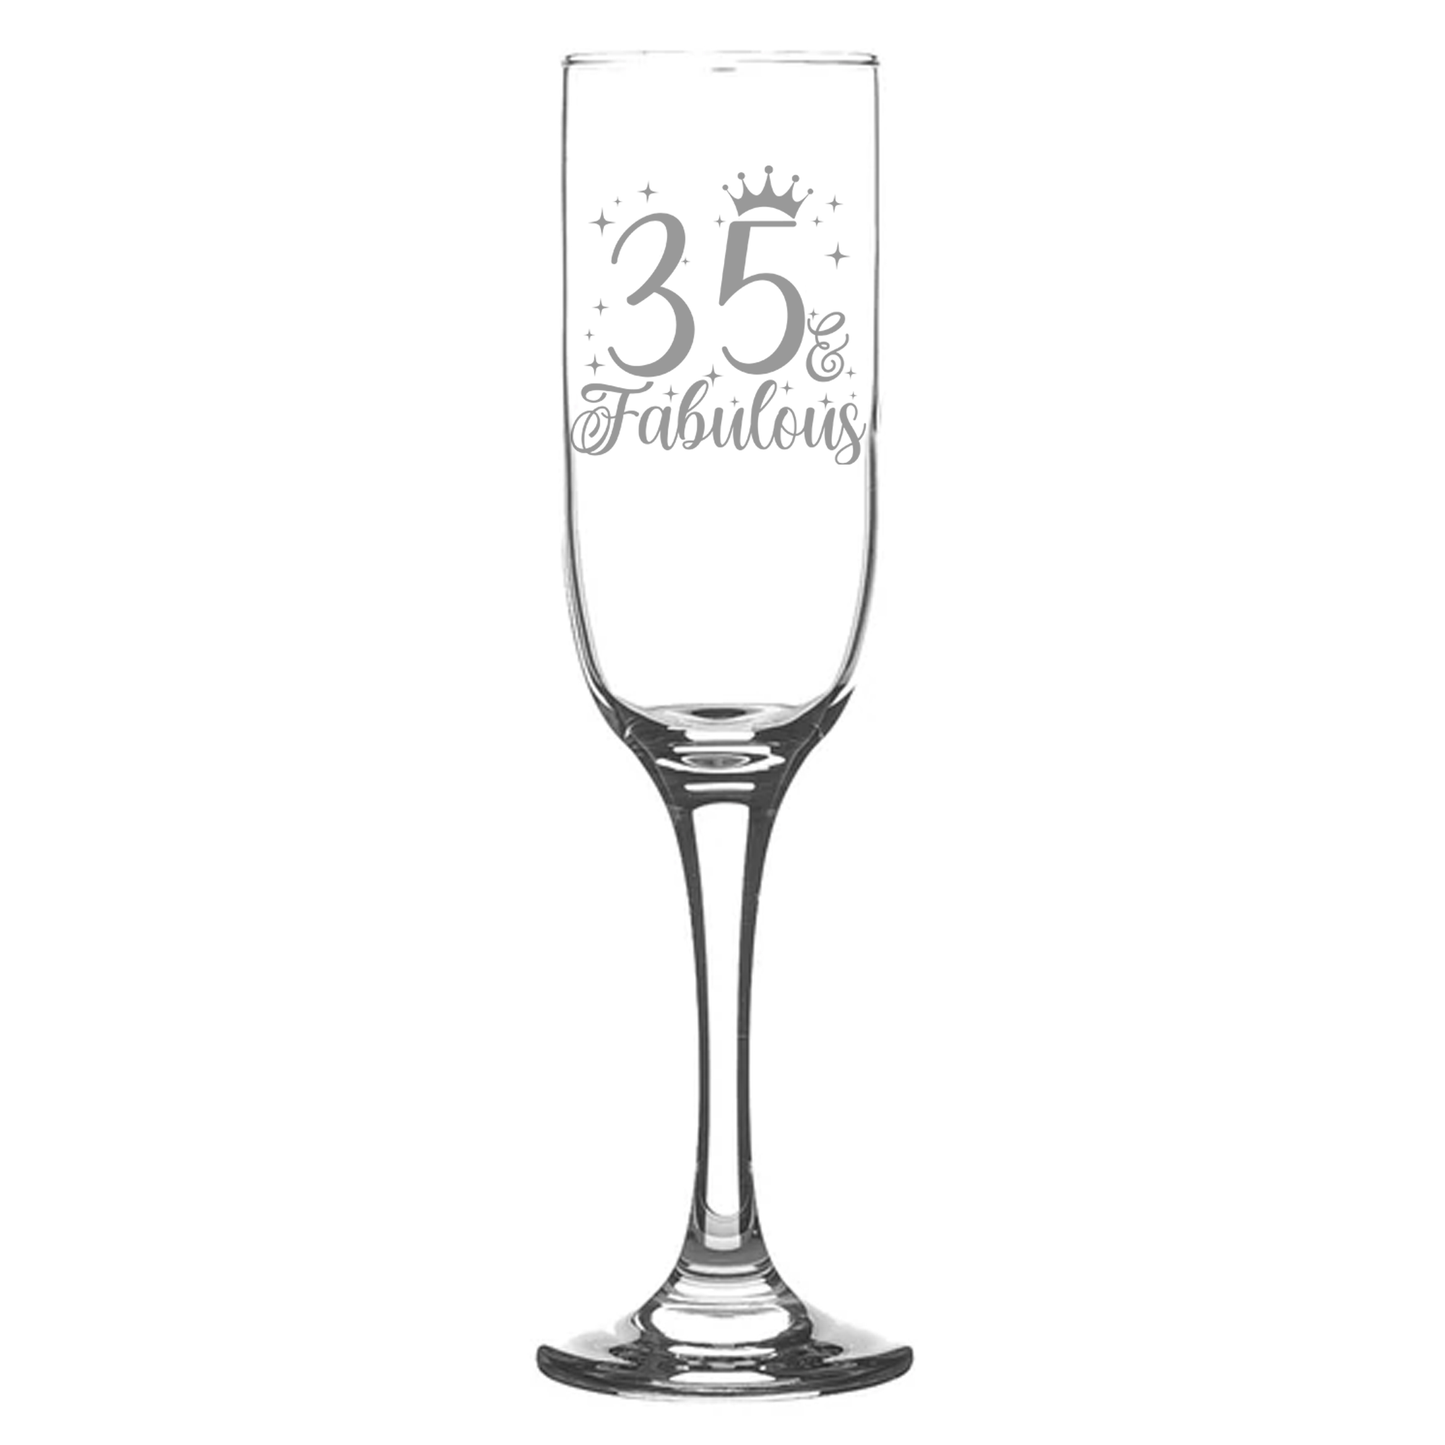 35 & Fabulous Engraved Champagne Glass and/or Coaster Set  - Always Looking Good - Champagne Glass On Its Own  